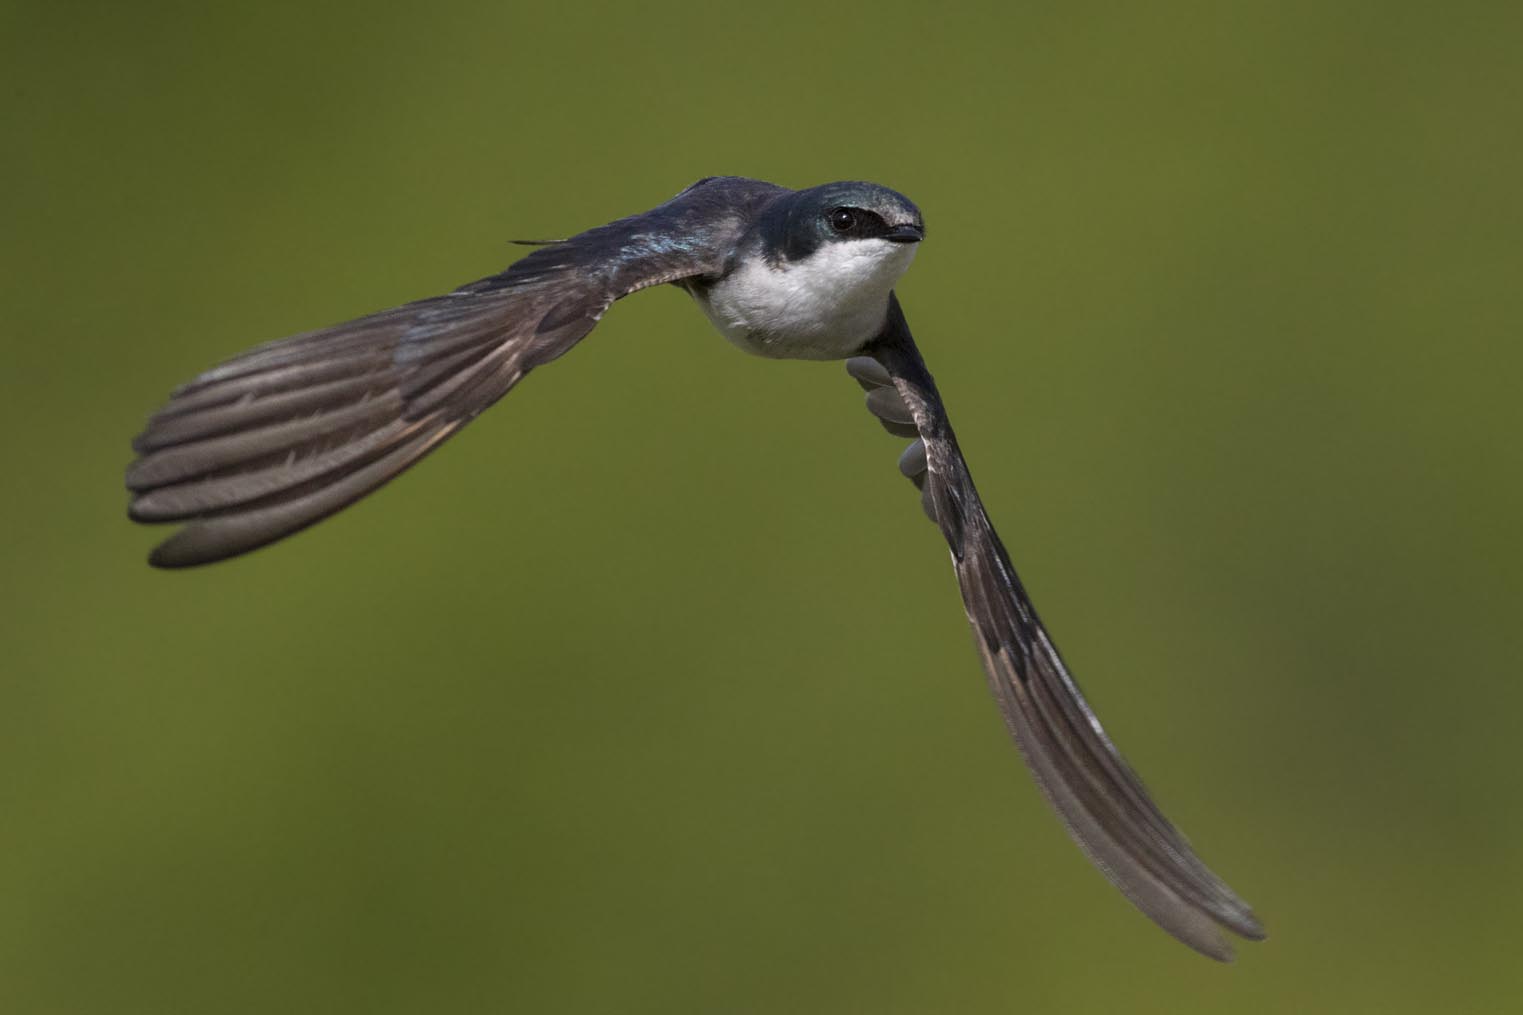 Tree Swallow flying 2672s